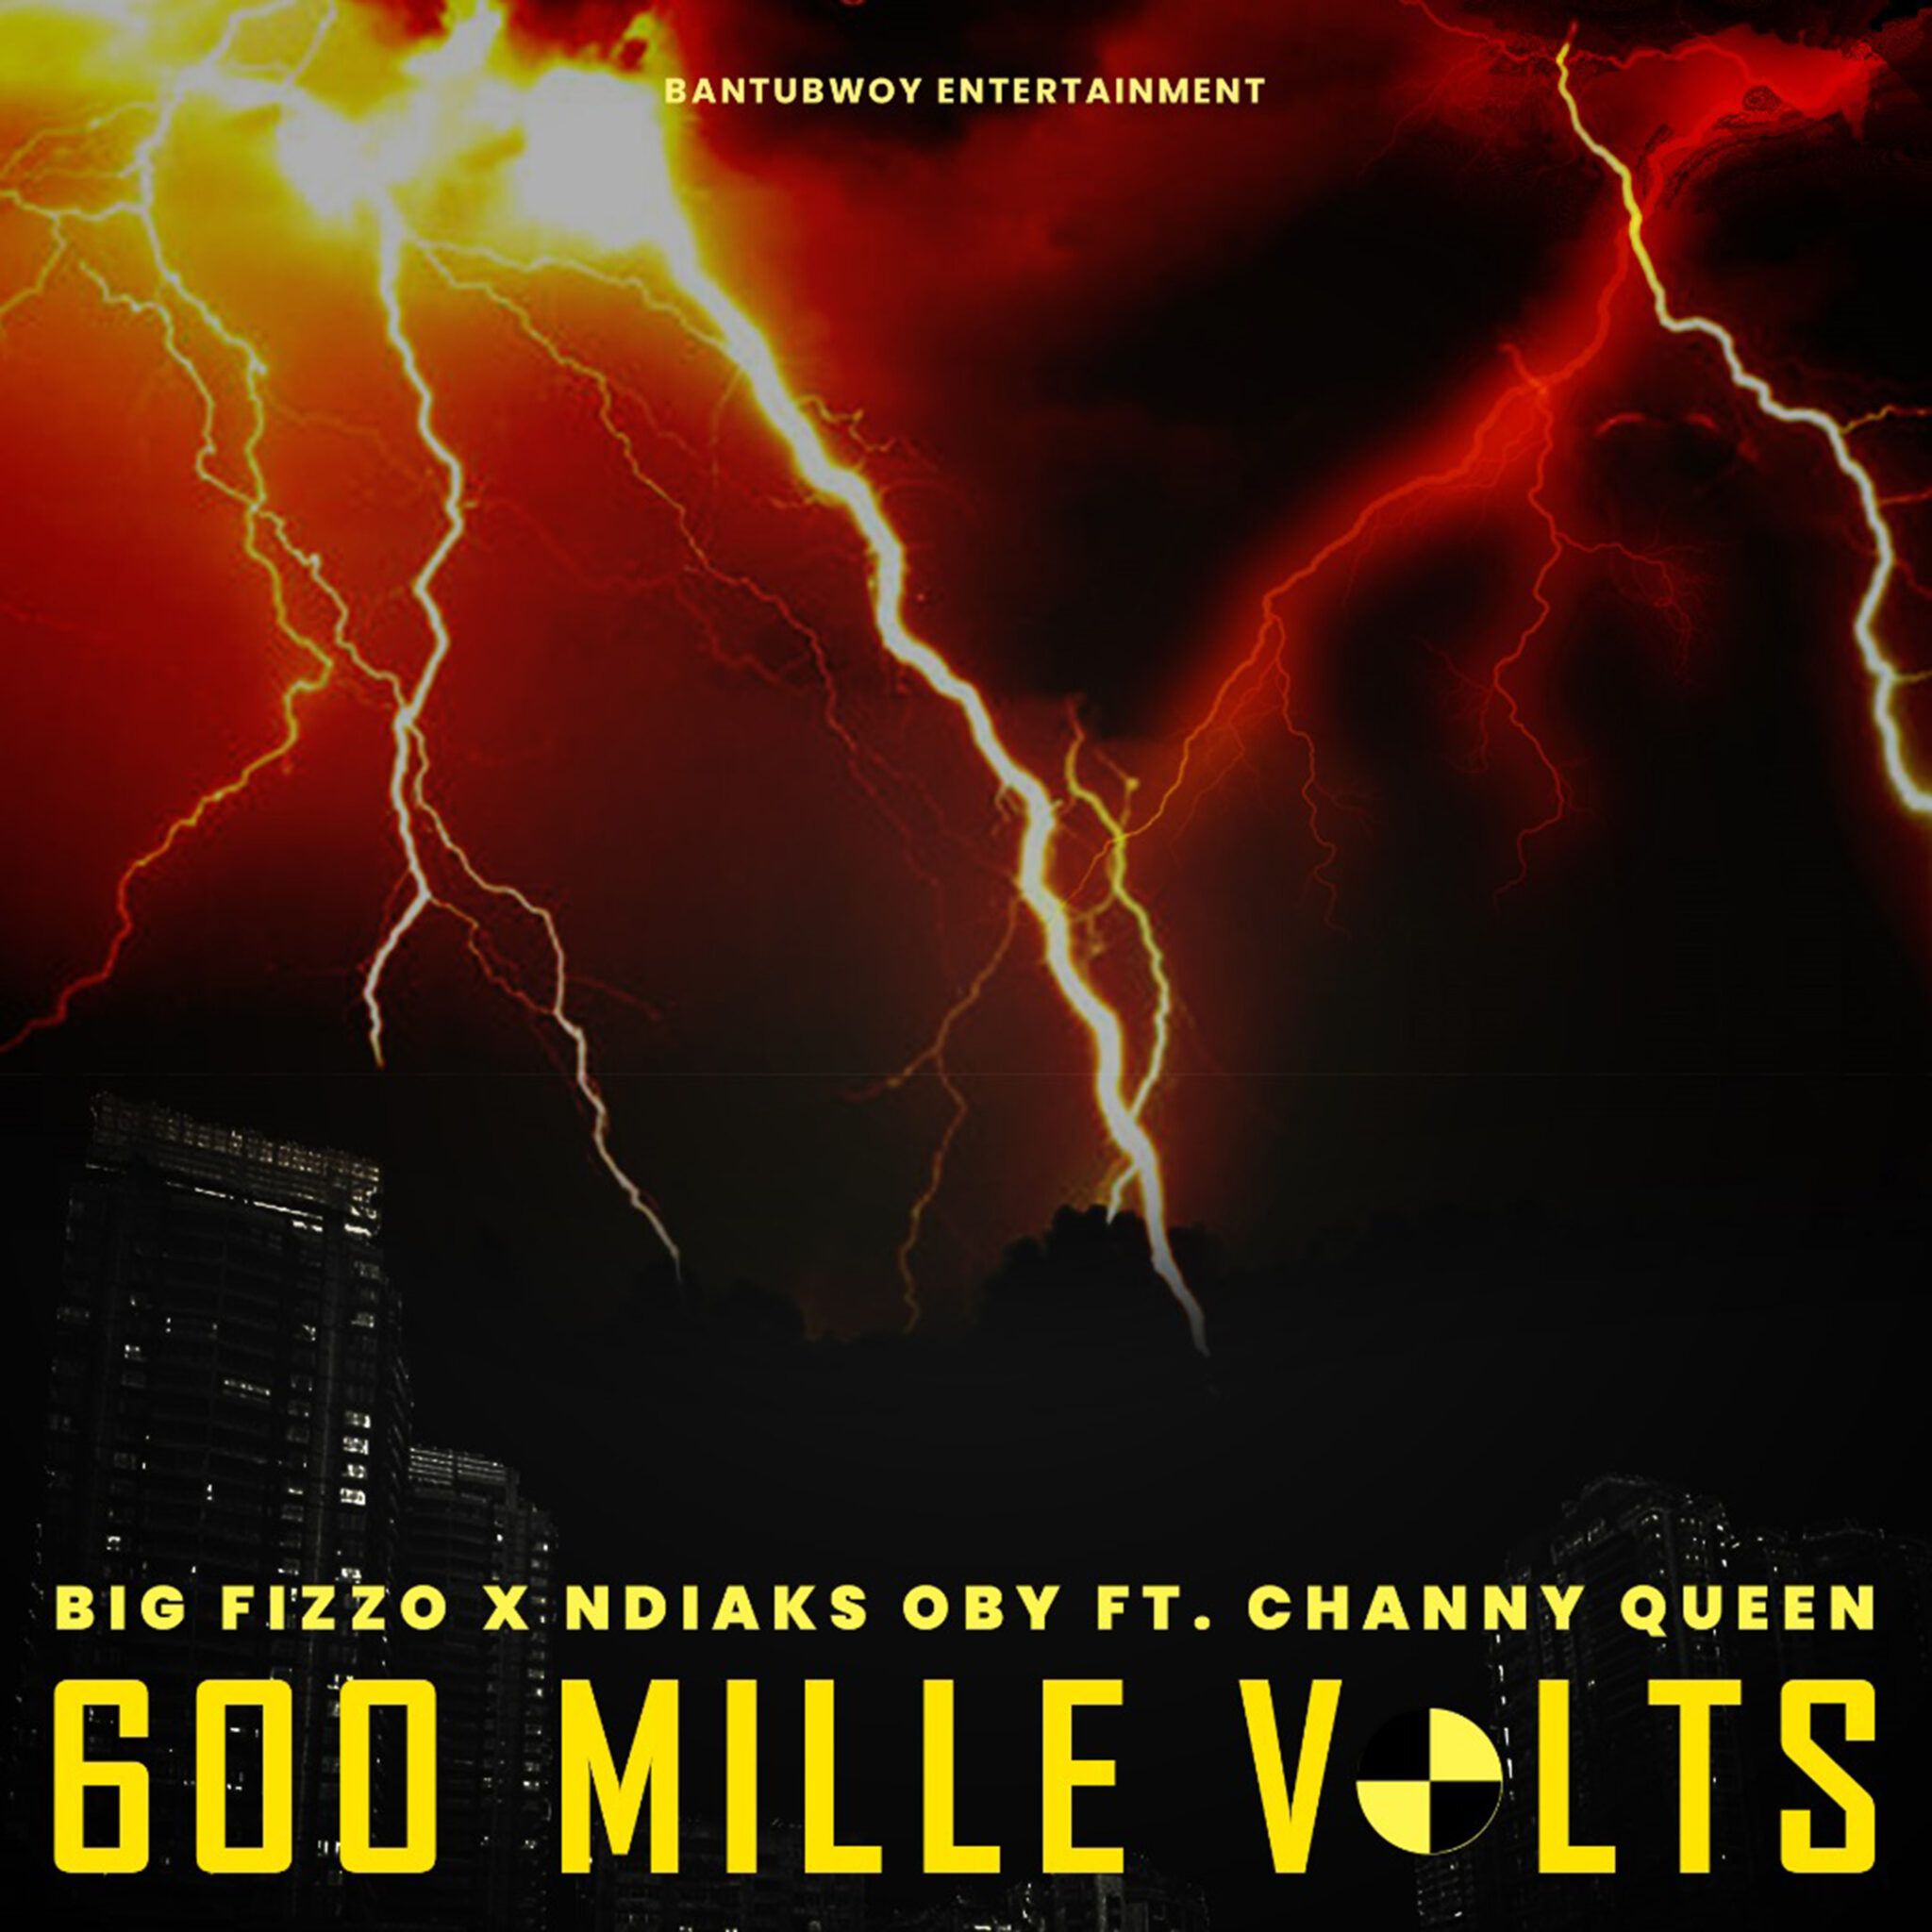 Download Audio Mp3 | Big Fizzo X Ndiaks Oby Ft. Channy Queen – 600 Mille Volts